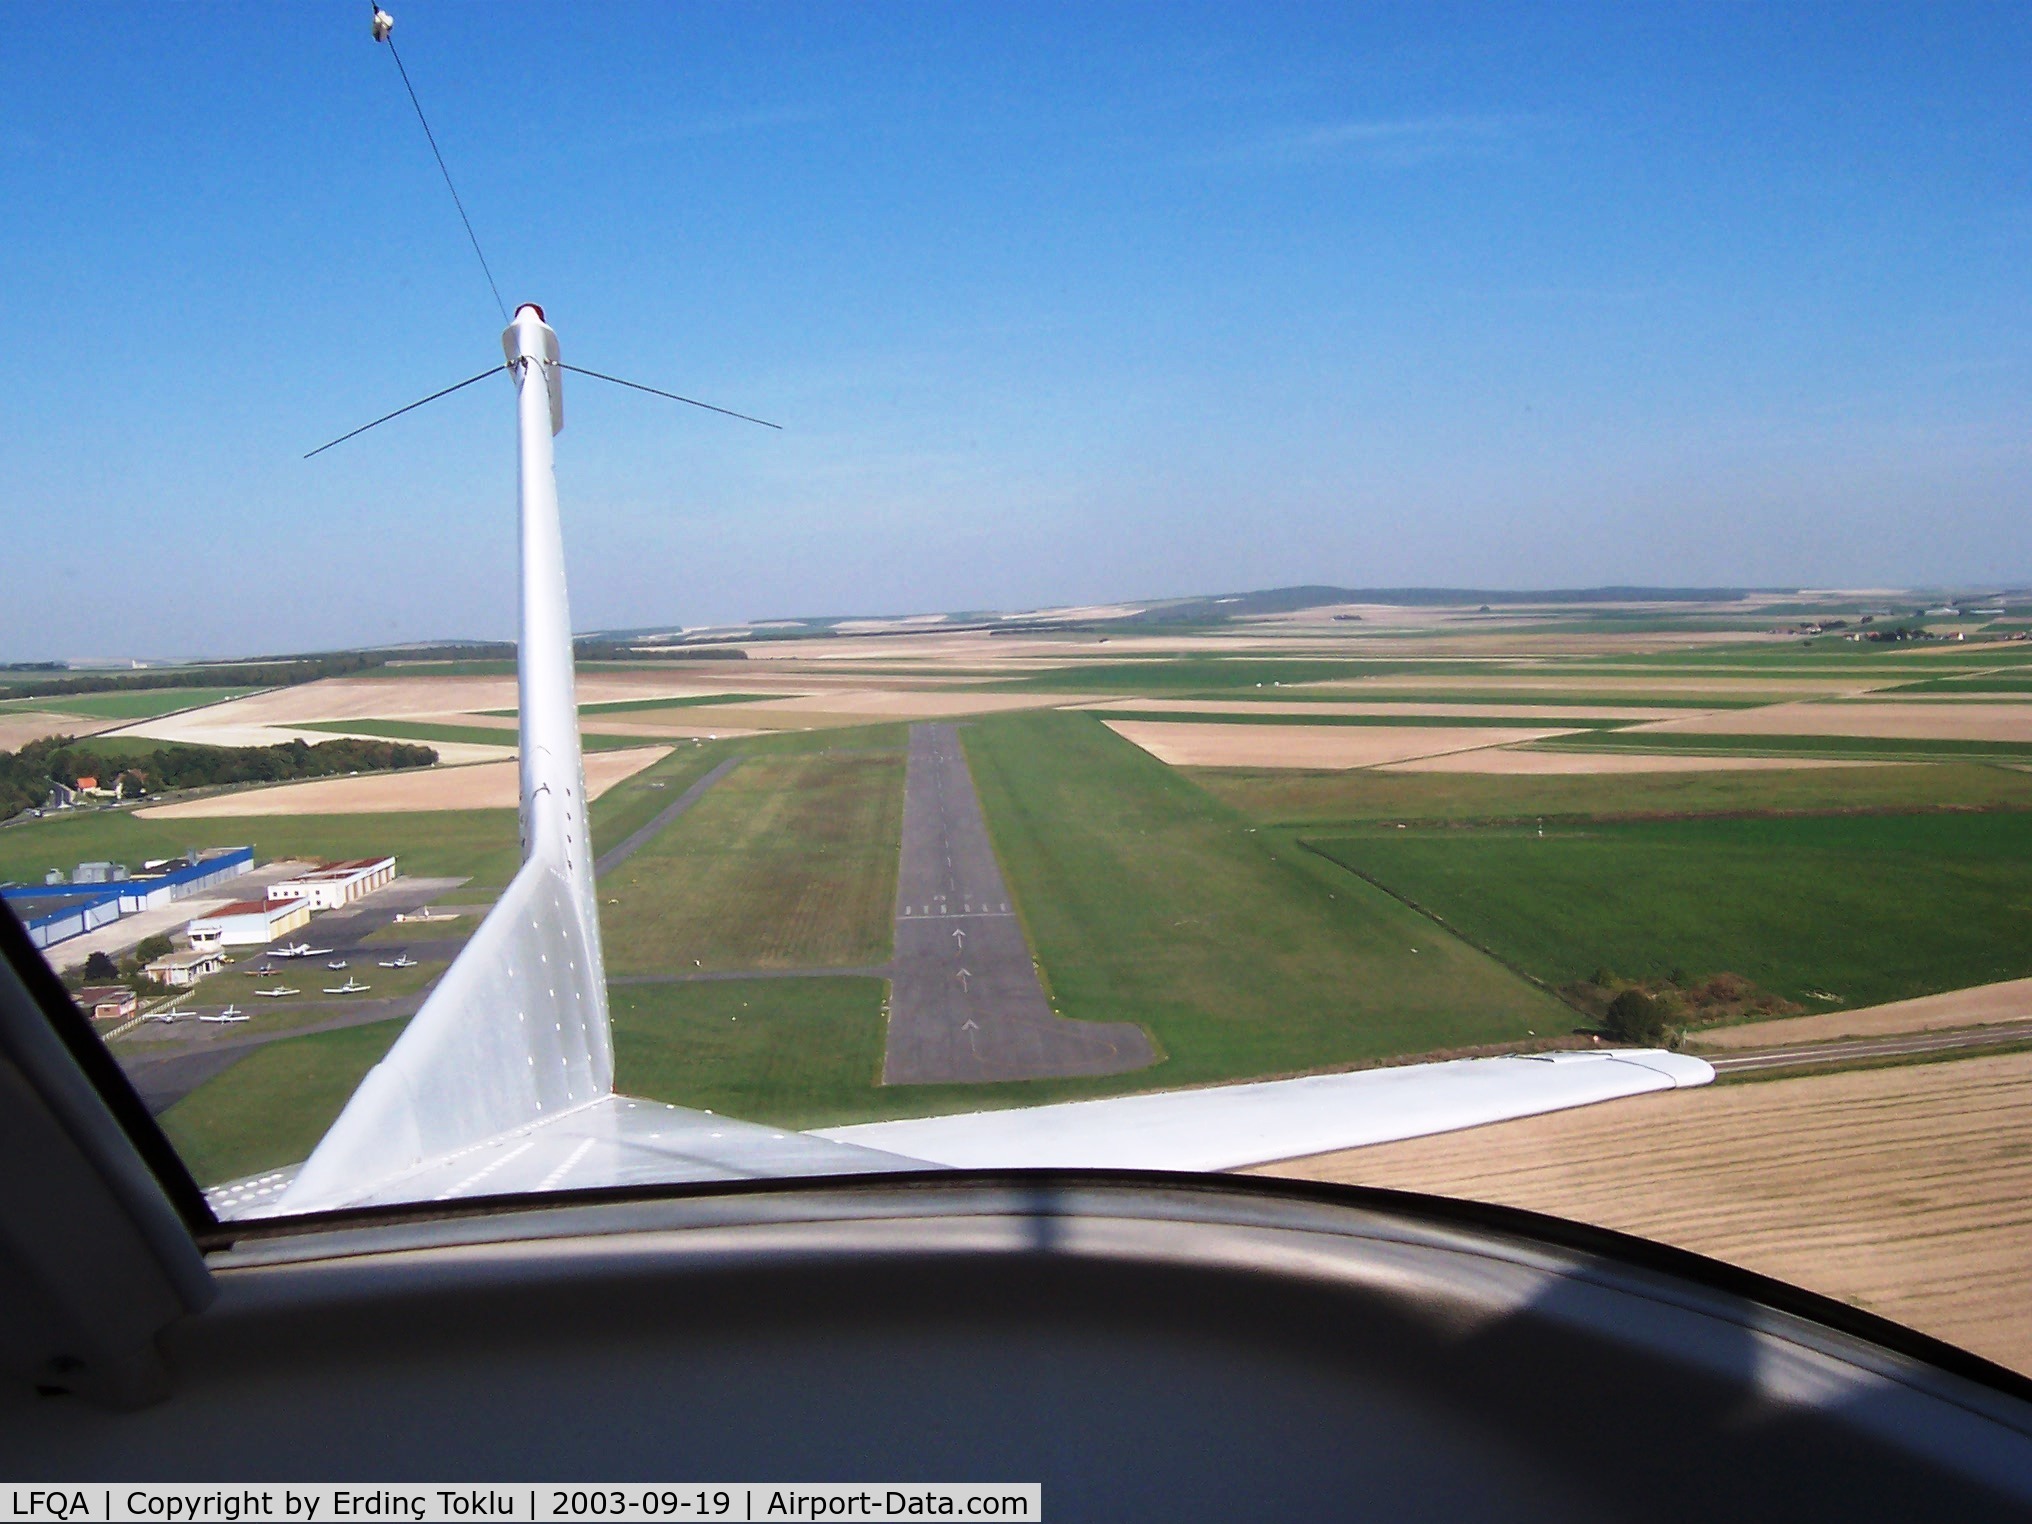 Reims Prunay Airport, Reims France (LFQA) - Taking off from Rwy 25 at Reims-Prunay